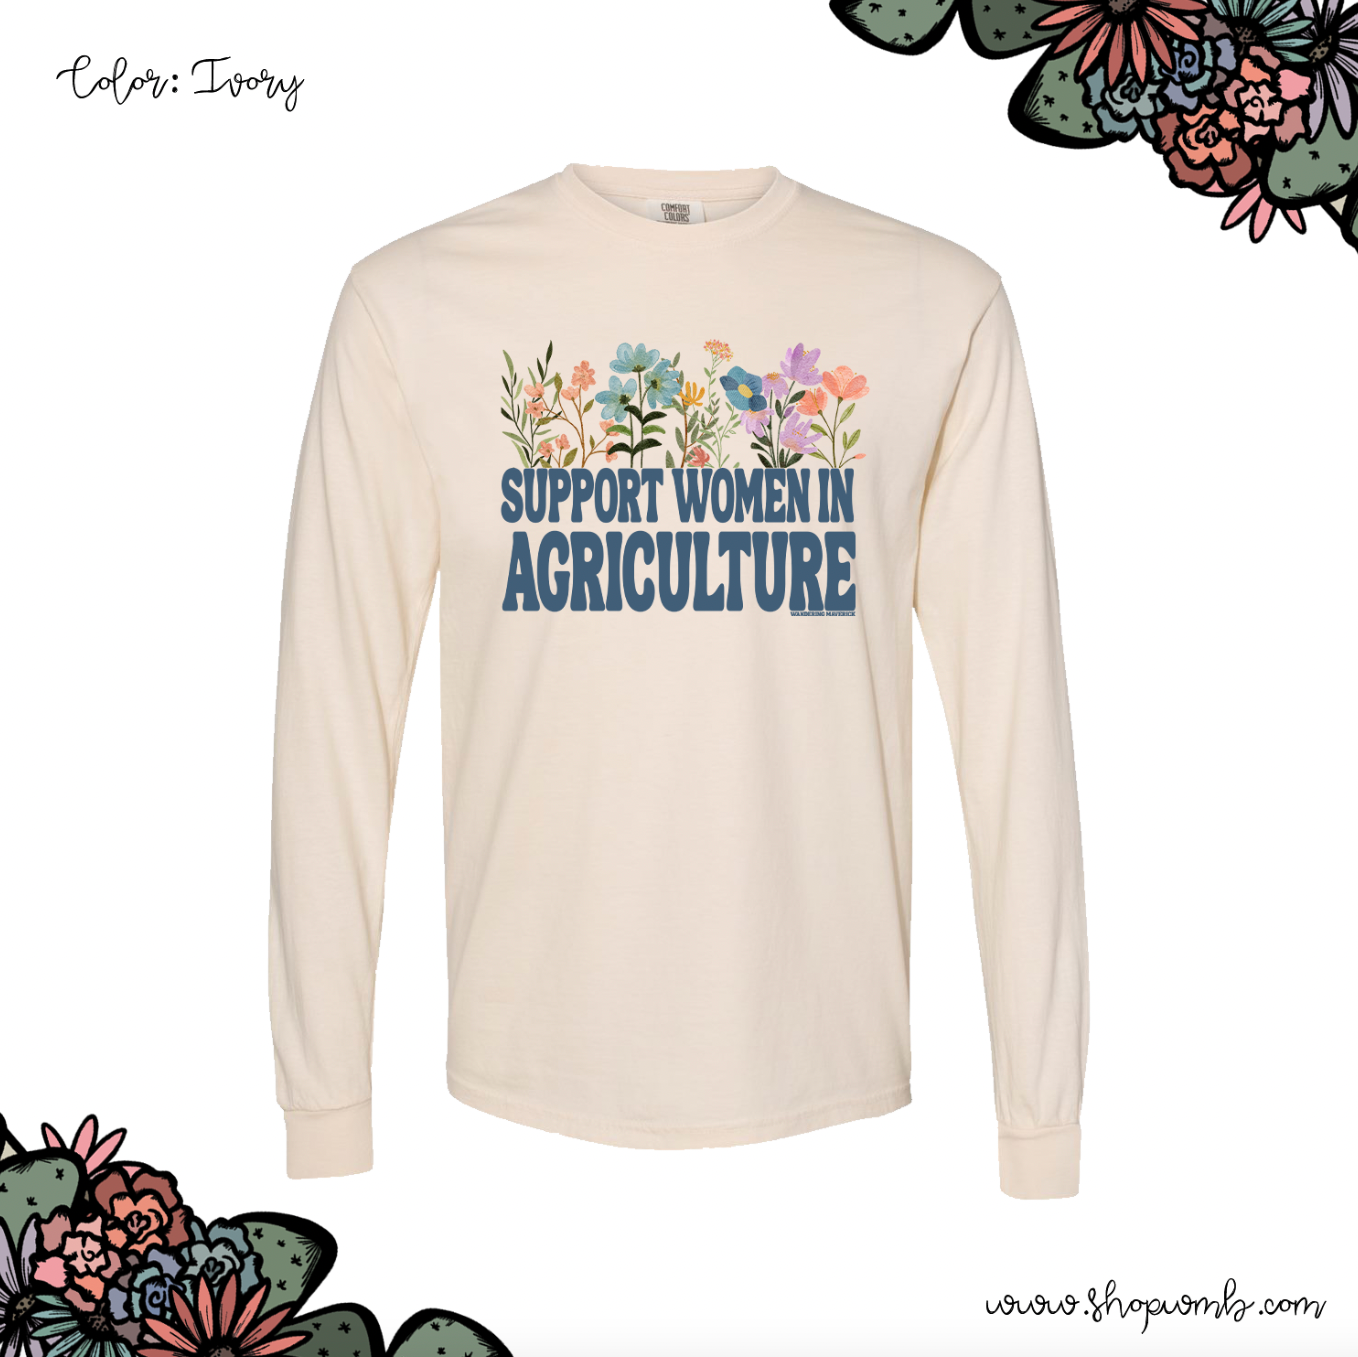 Blooming Support Women In Agriculture LONG SLEEVE T-Shirt (S-3XL) - Multiple Colors!